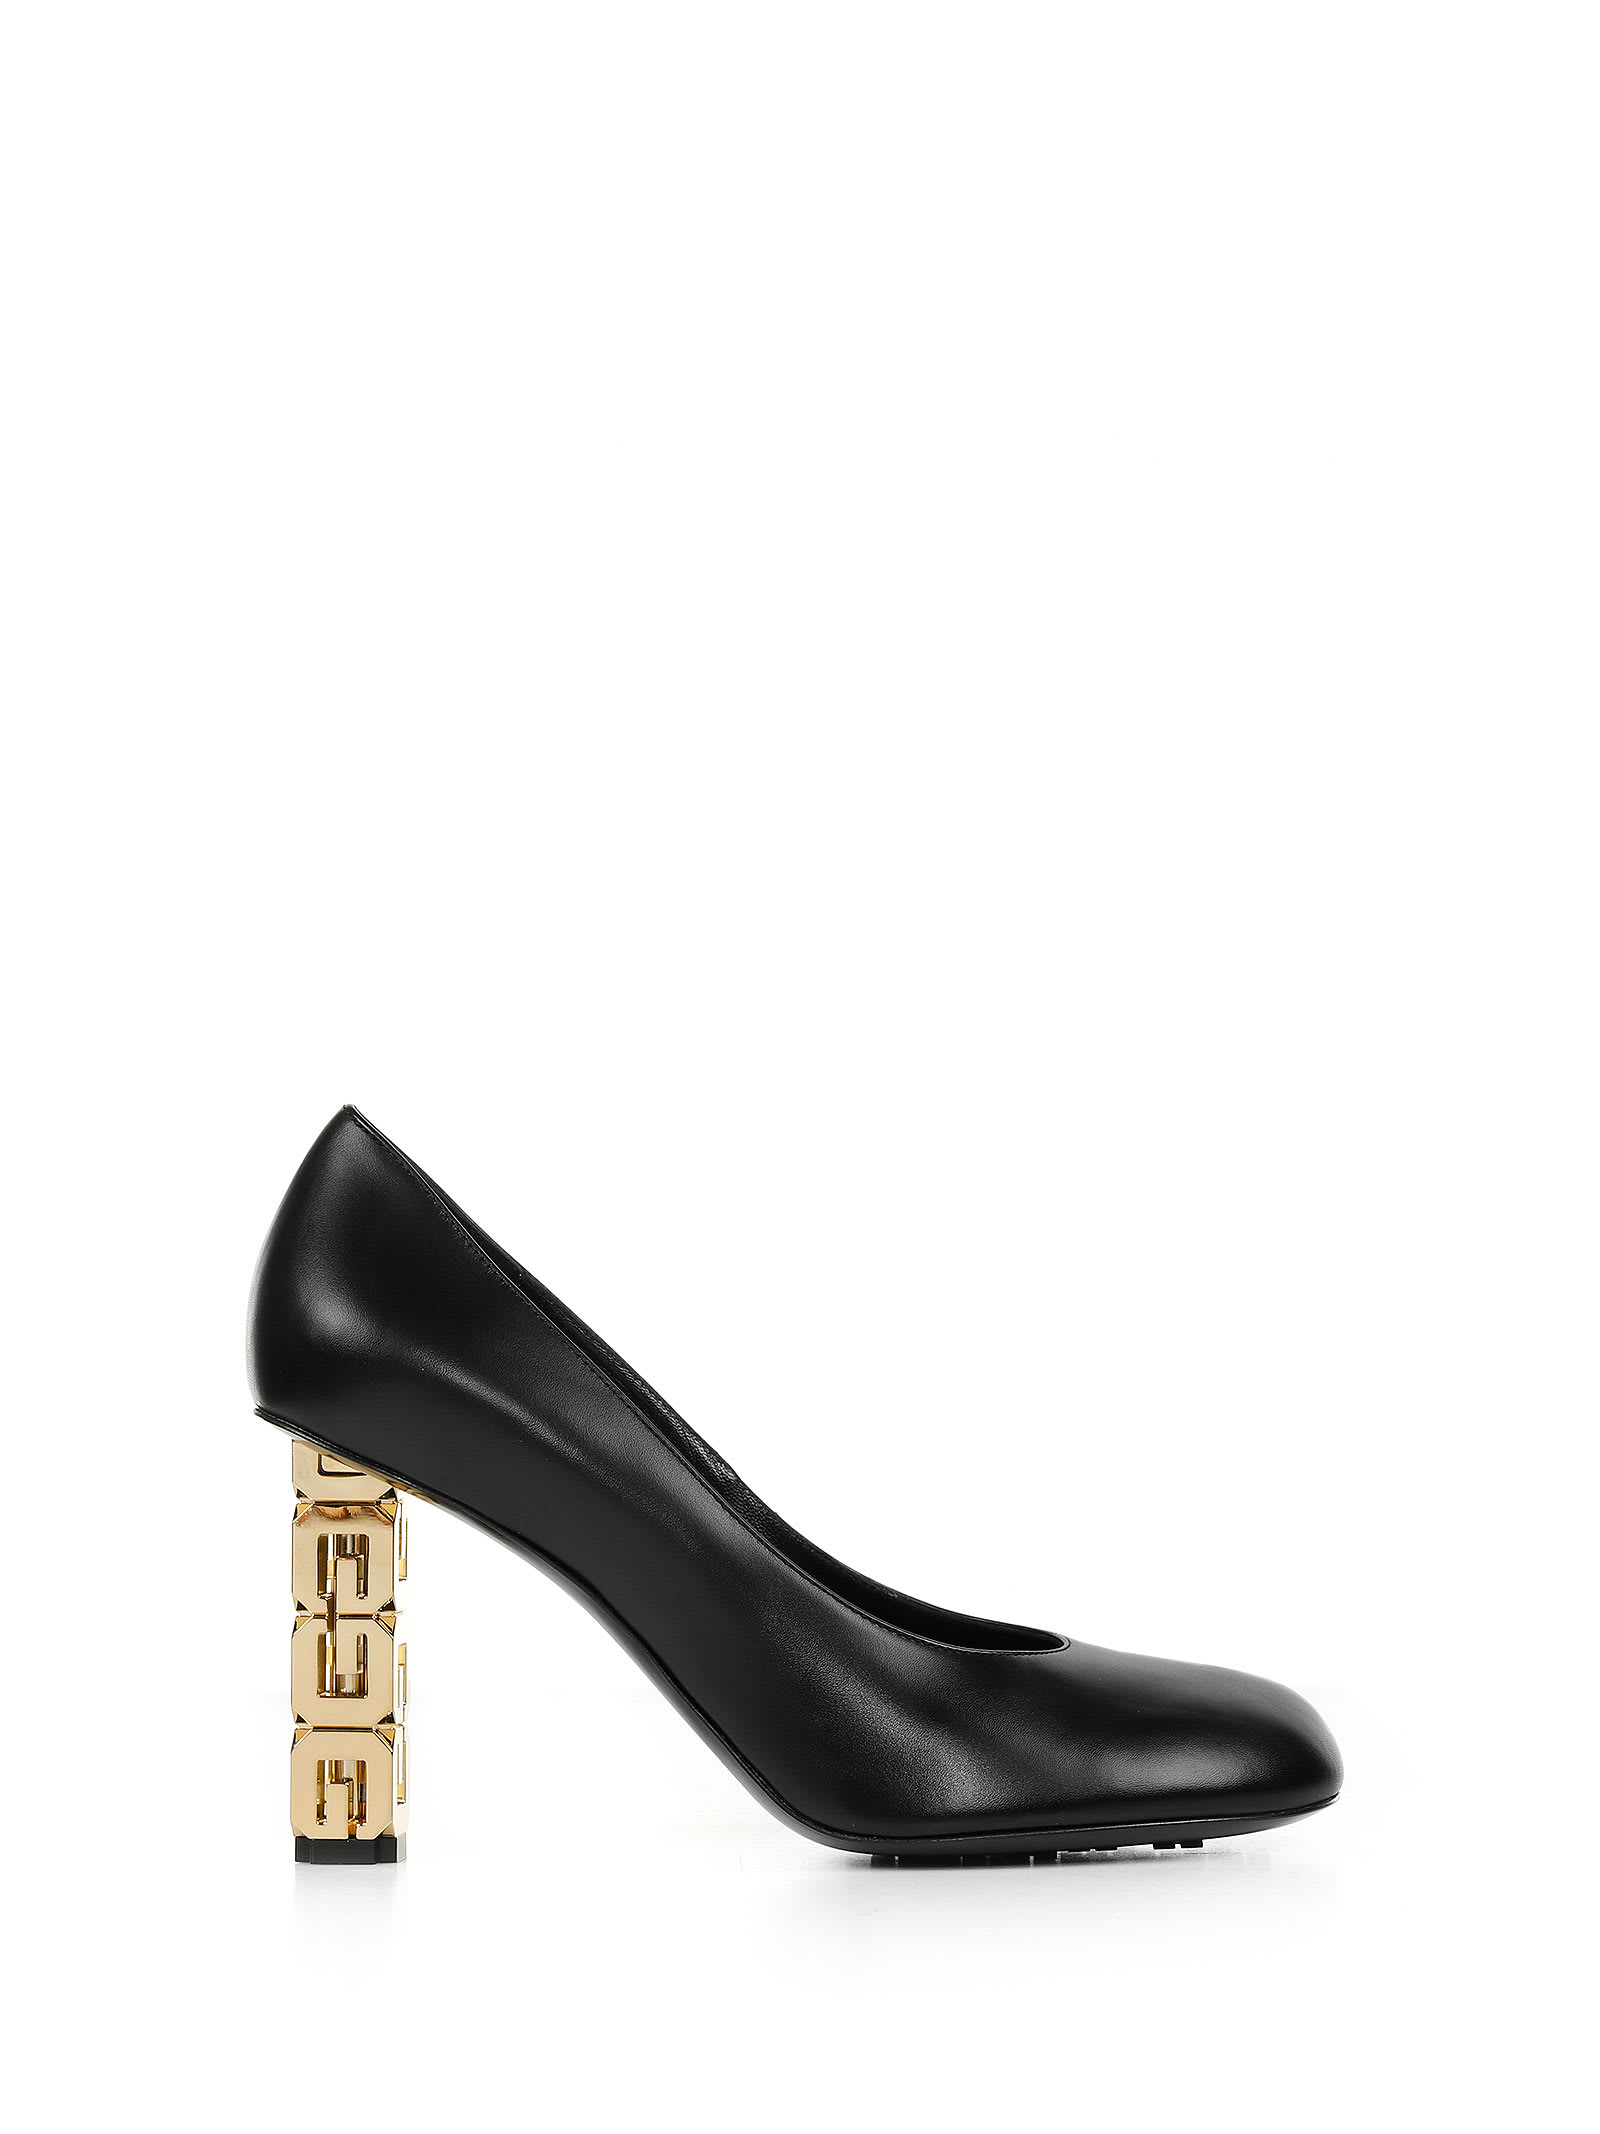 Givenchy Pumps In Black Leather